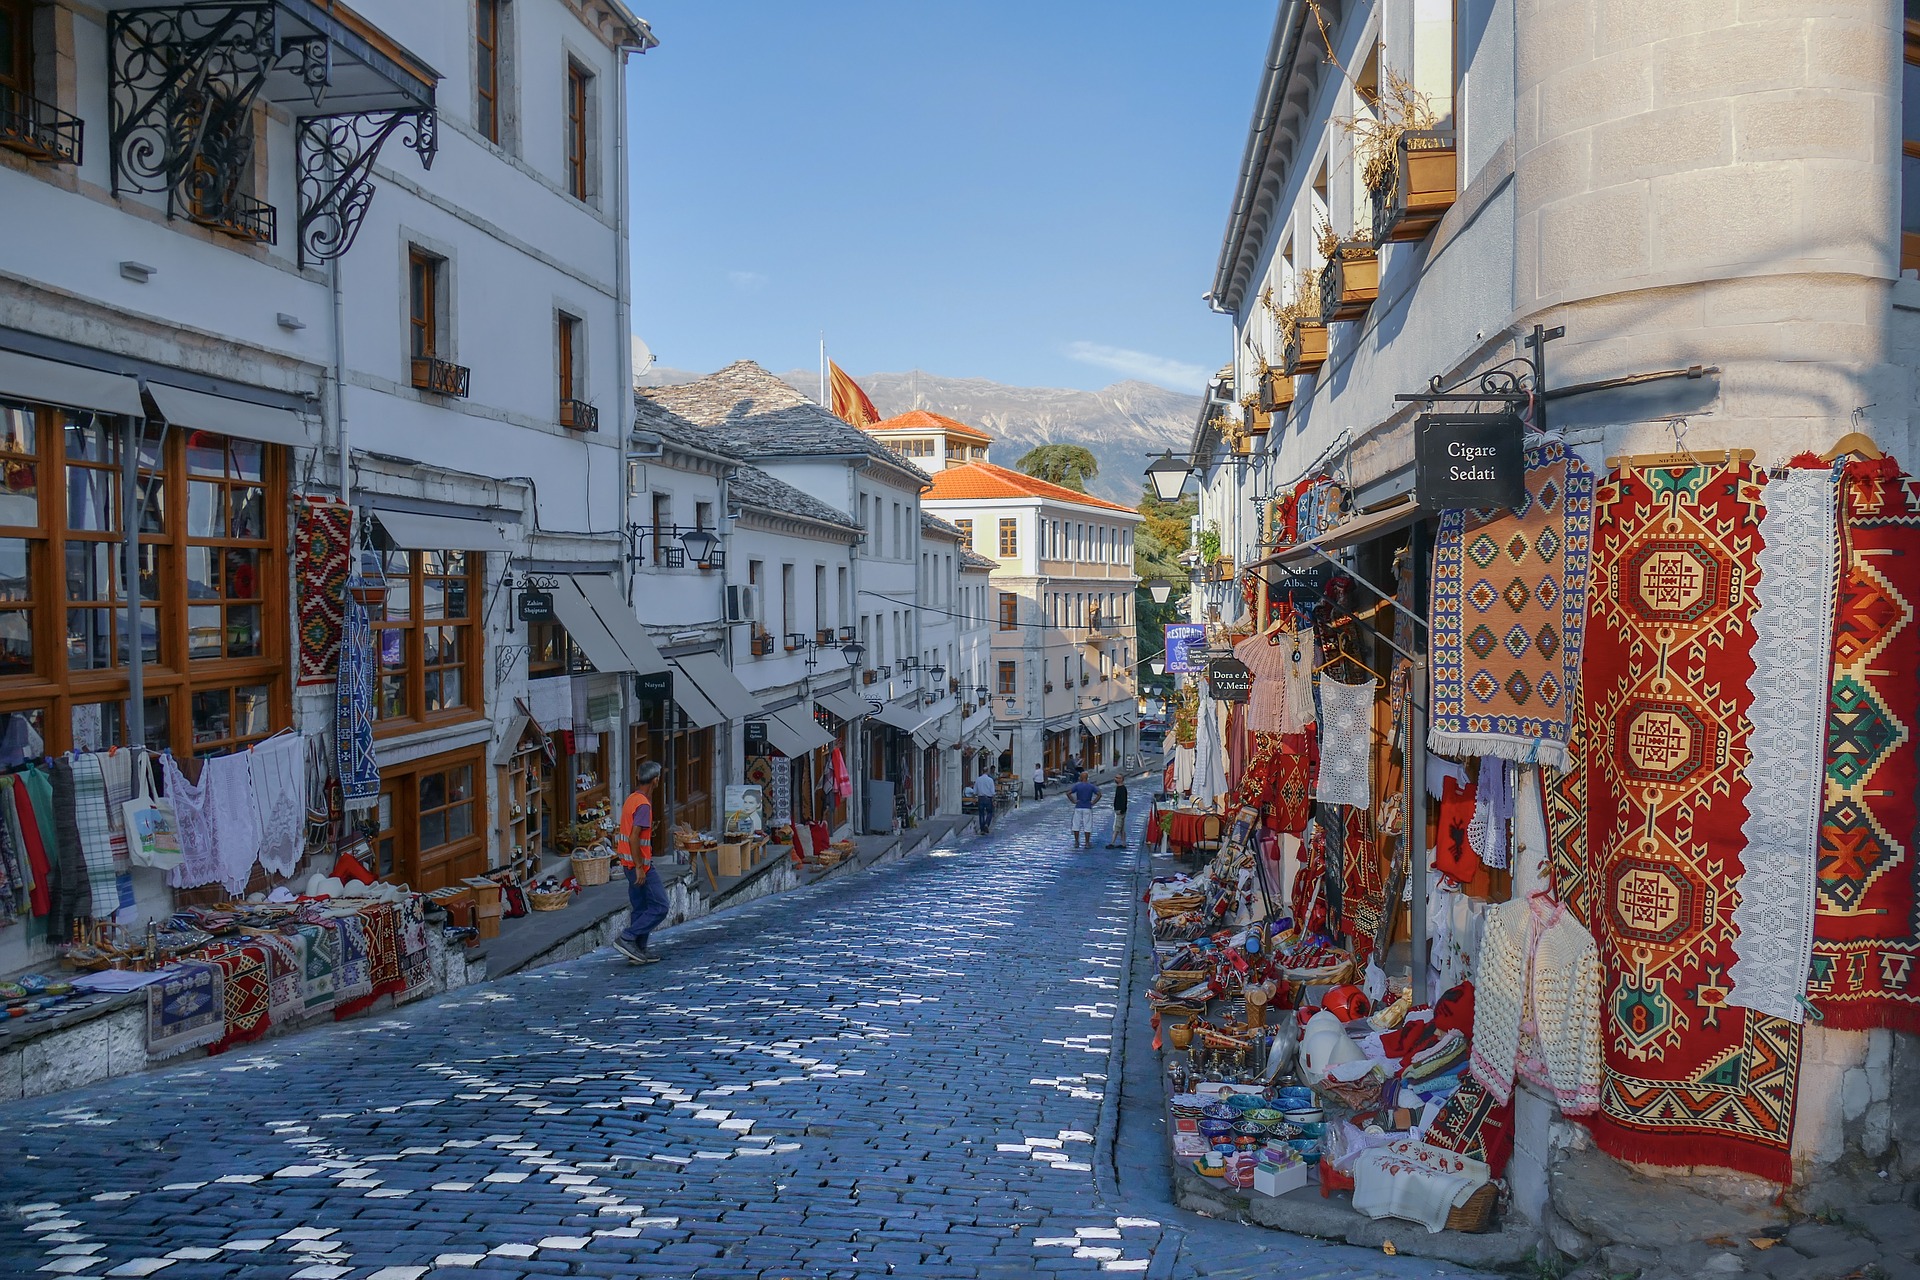 Cobblestone road with shops on both sides selling homemade wares